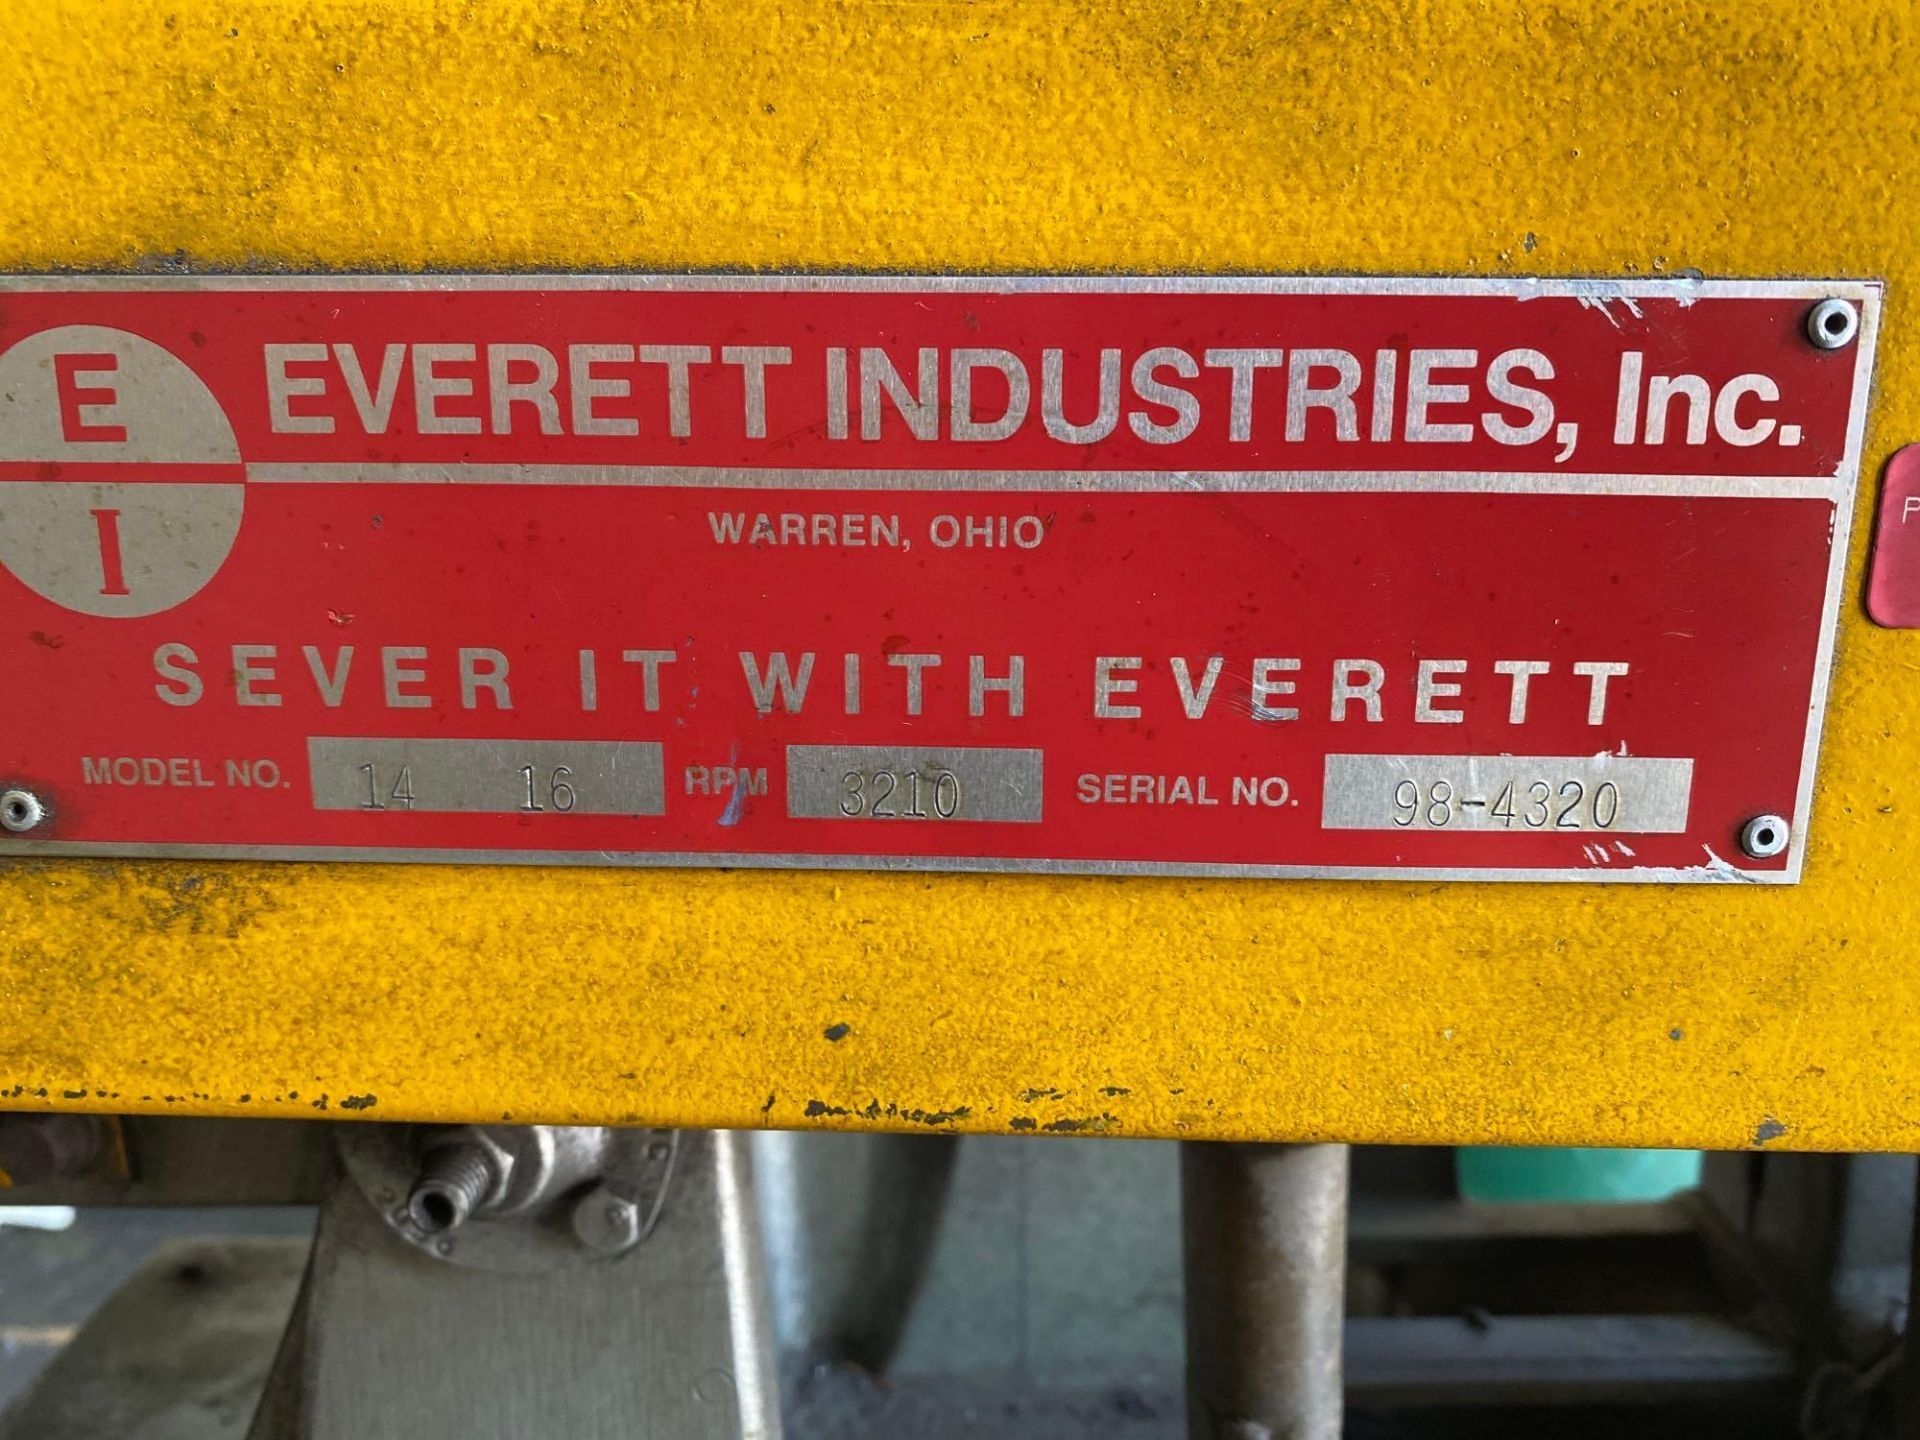 Everett Industries 14-16 14” Cold Saw, s/n 98-4320 - Image 4 of 4